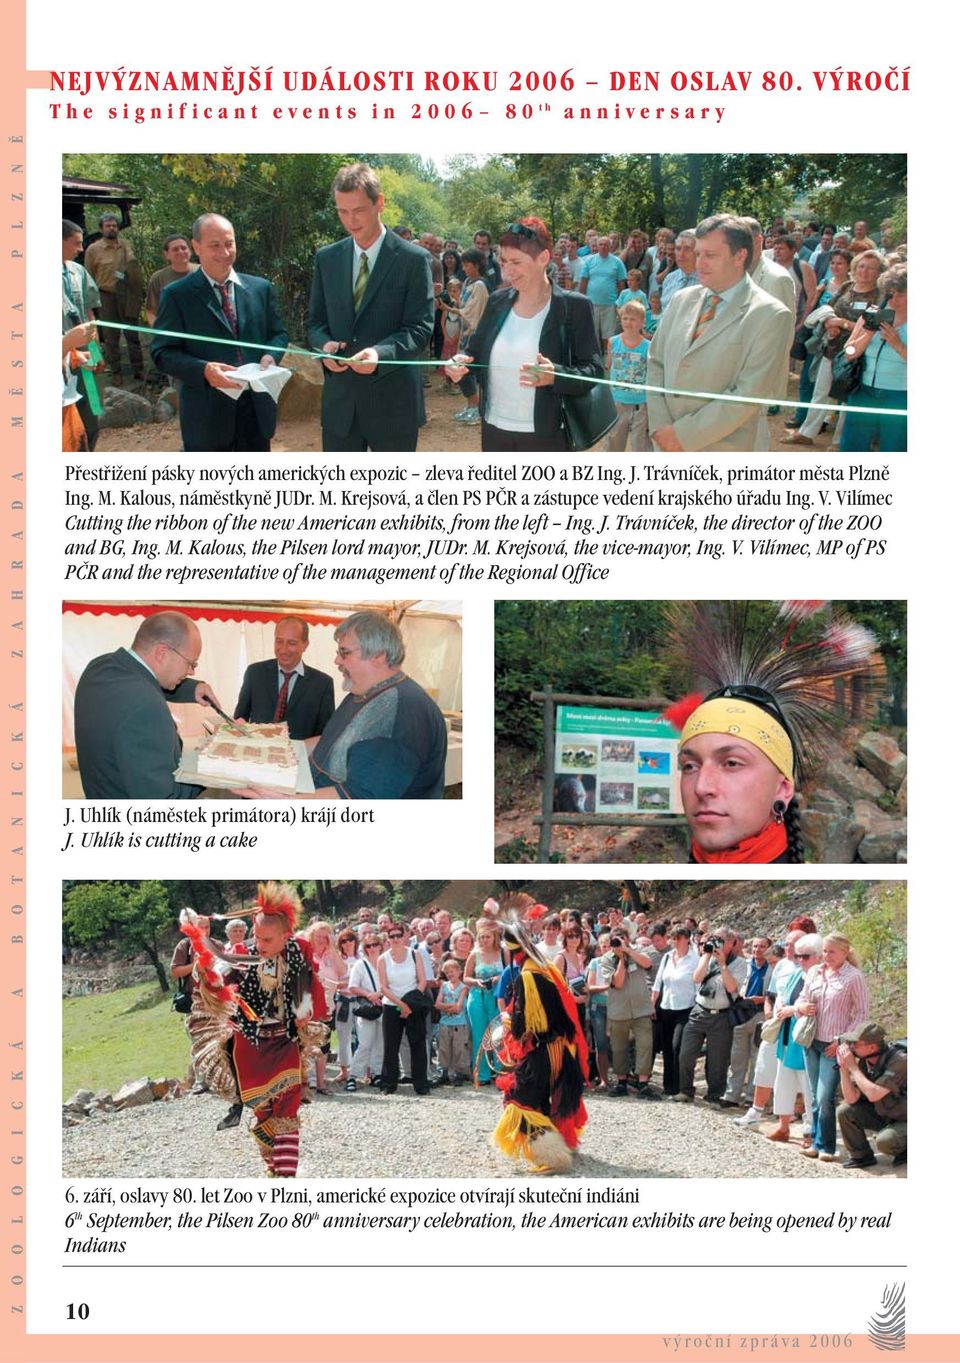 Vilímec Cutting the ribbon of the new American exhibits, from the left Ing. J. Trávníček, the director of the ZOO and BG, Ing. M. Kalous, the Pilsen lord mayor, JUDr. M. Krejsová, the vice-mayor, Ing.